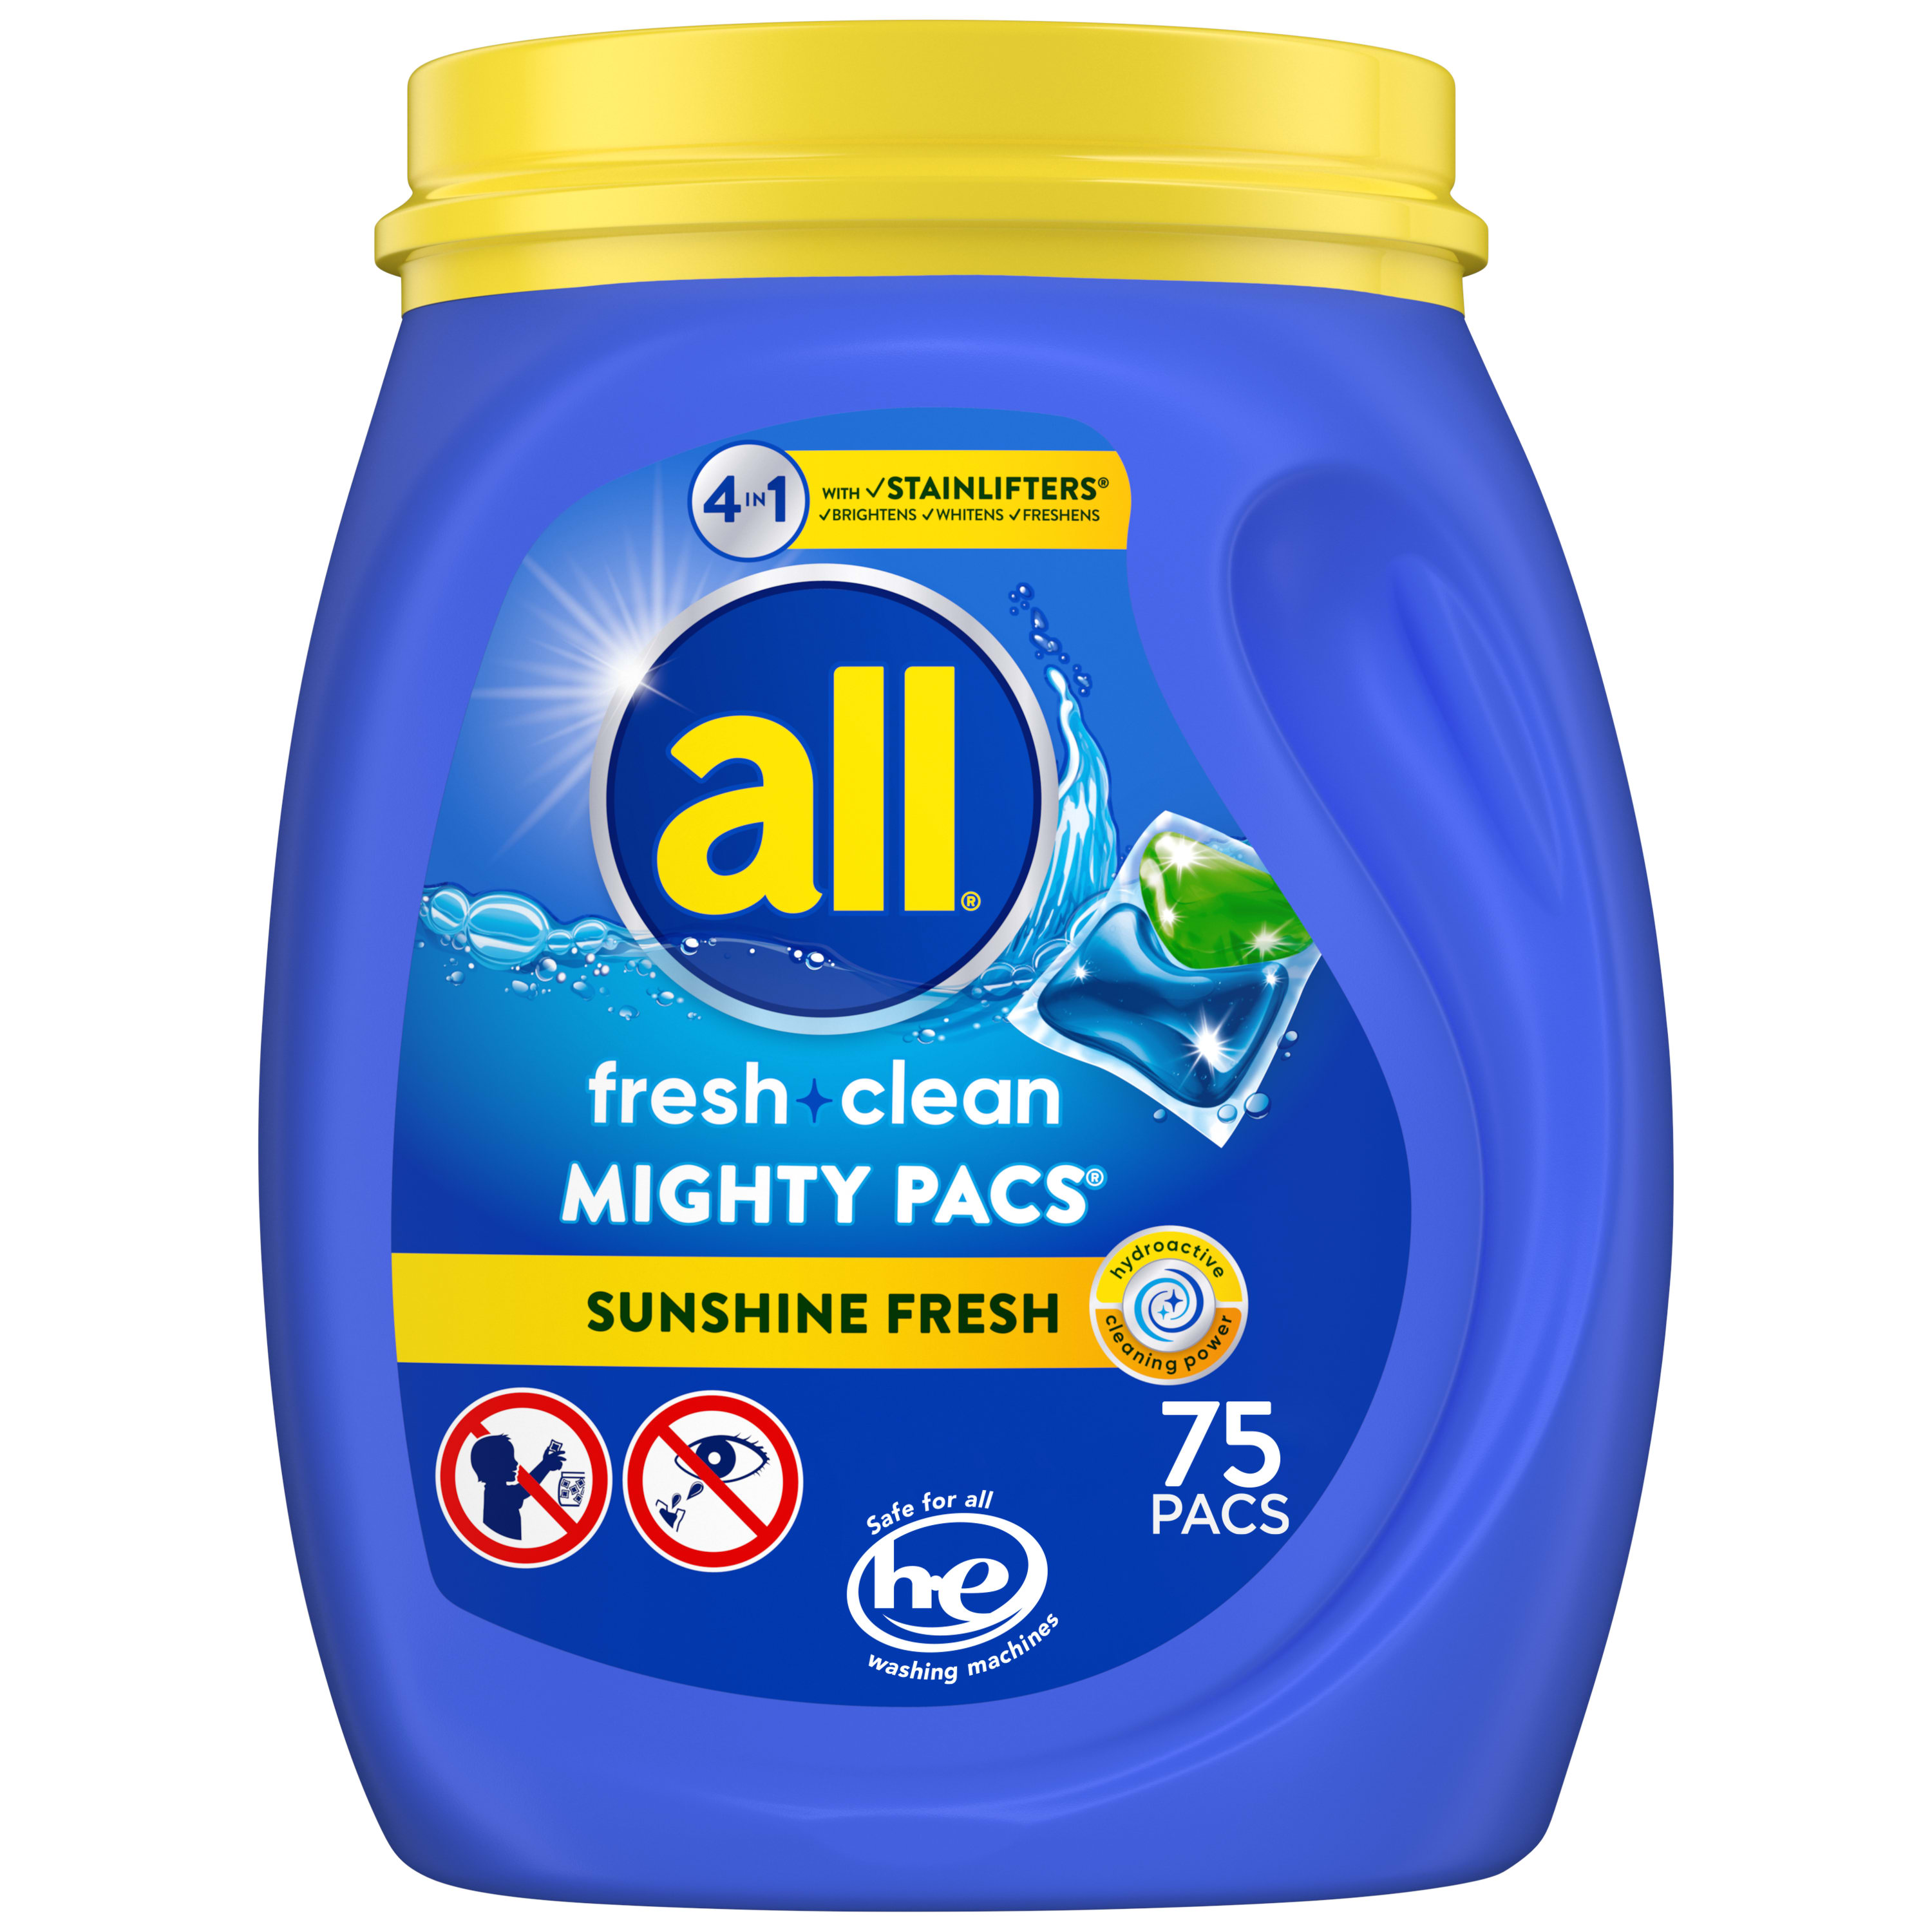 all Mighty Pacs Laundry Detergent Pacs, Fresh Clean 4 in 1 with Stainlifters, Sunshine Fresh, 75 Count - image 1 of 6